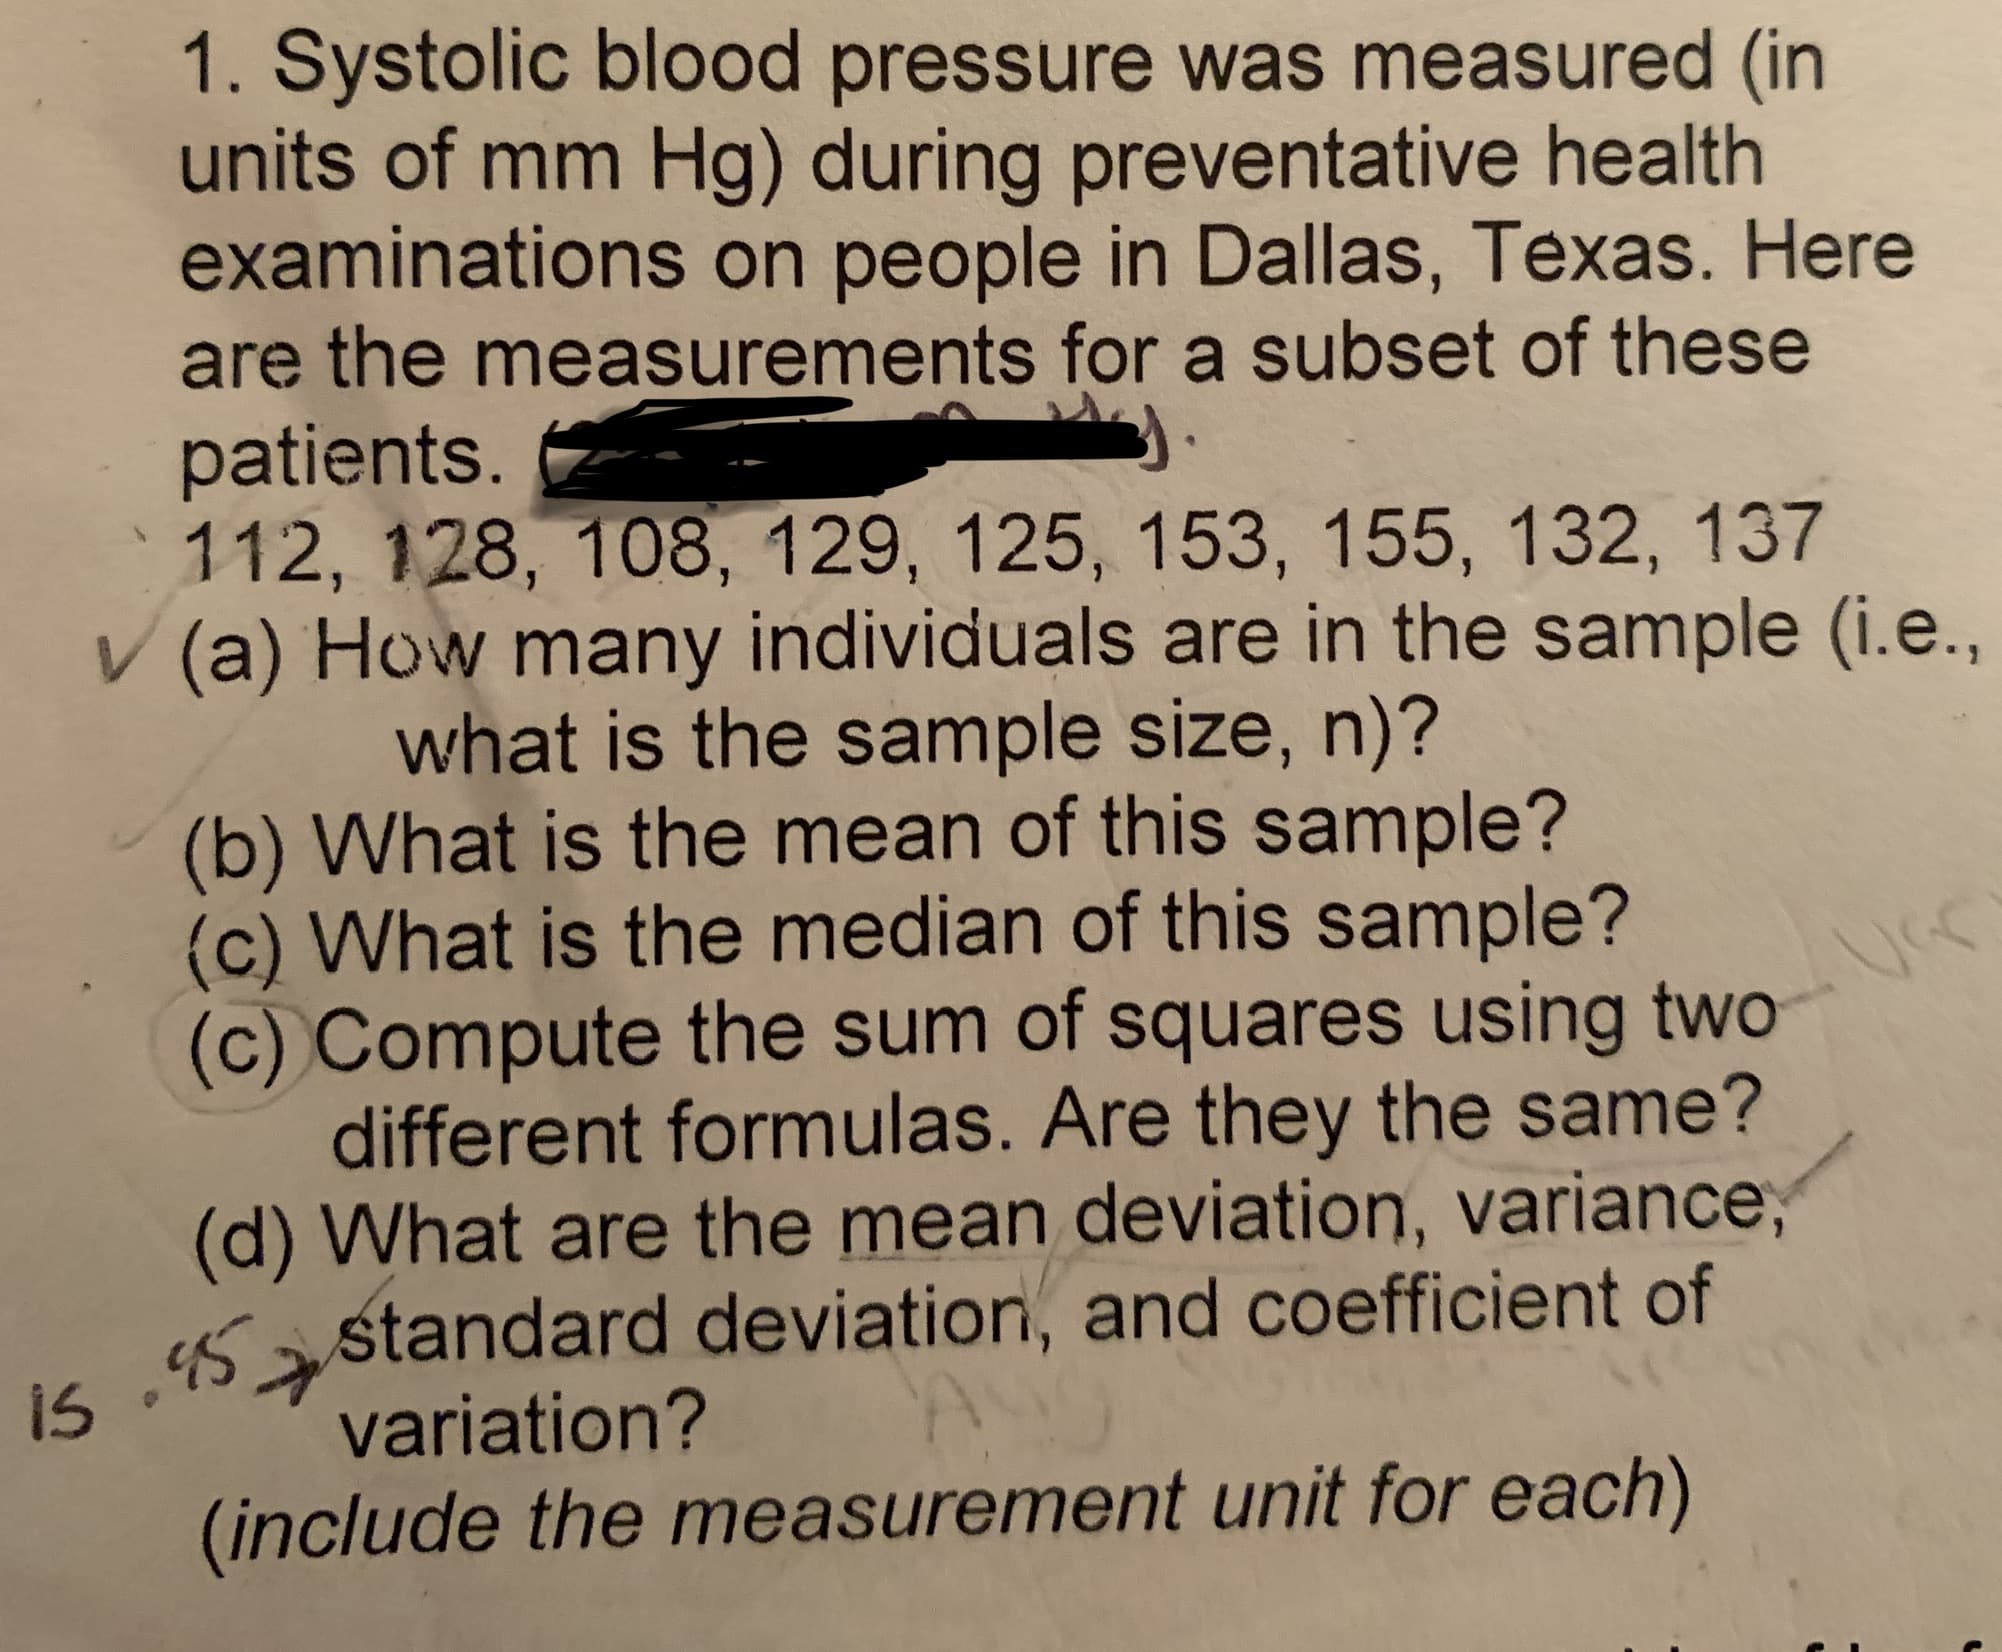 1. Systolic blood pressure was measured (in
units of mm Hg) during preventative health
examinations on people in Dallas, Texas. Here
are the measurements for a subset of these
patients.
112, 128, 108, 129, 125, 153, 155, 132, 137
V (a) How many individuals are in the sample (i.e.,
what is the sample size, n)?
(b) What is the mean of this sample?
(c) What is the median of this sample?
(c) Compute the sum of squares using two
different formulas. Are they the same?
(d) What are the mean deviation, variance,
s astandard deviation, and coefficient of
variation?
(include the measurement unit for each)
